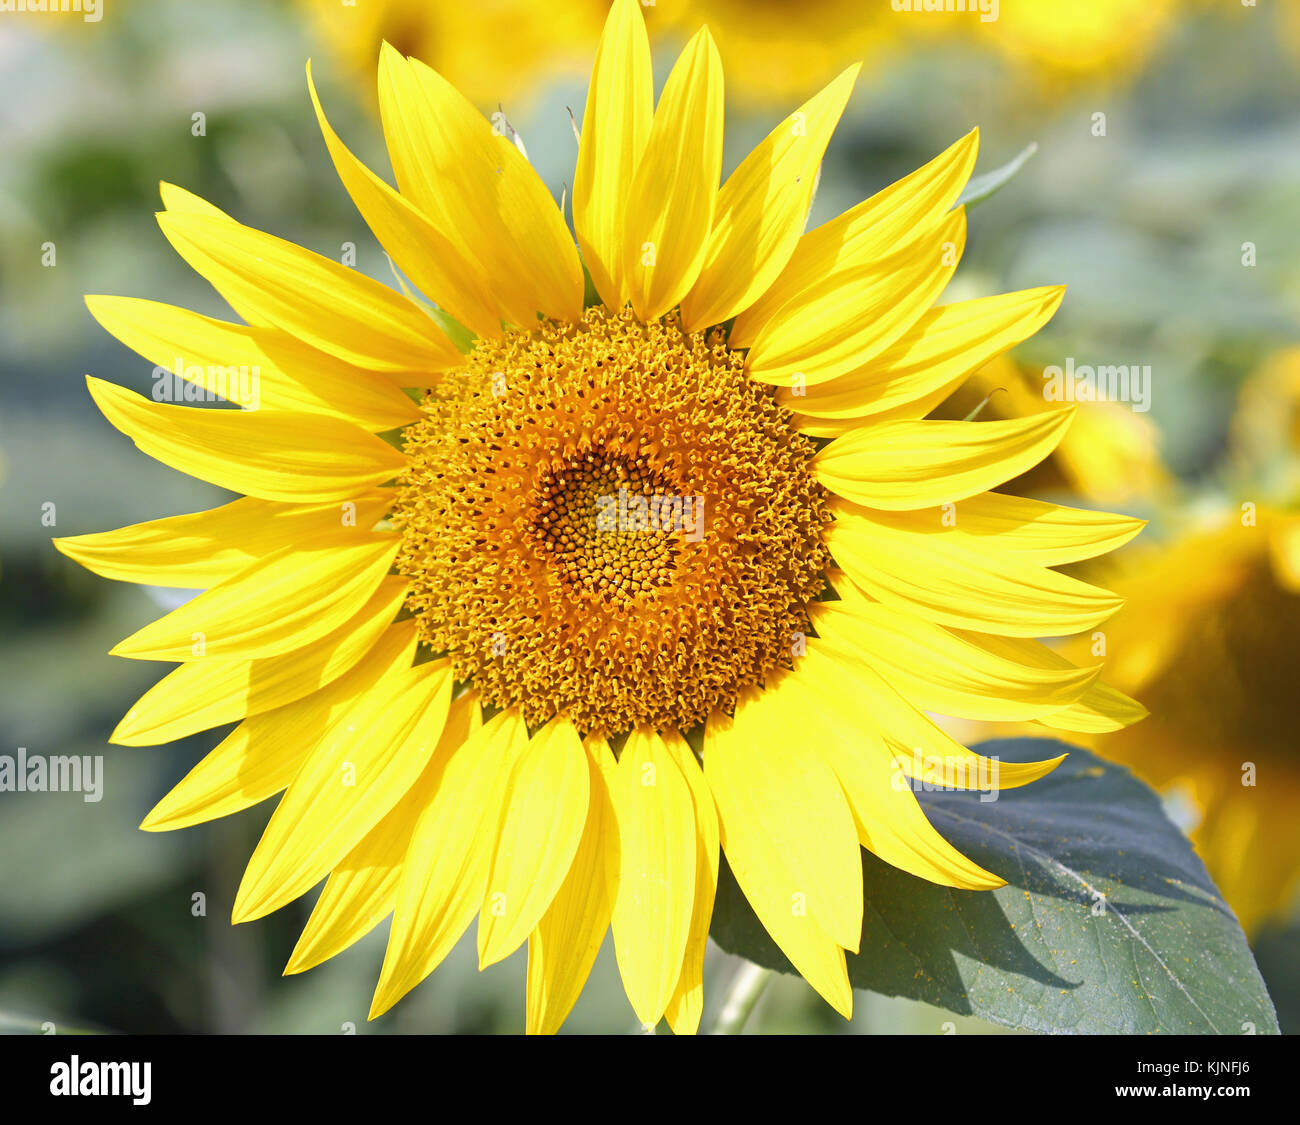 big yellow sunflower bloom blossomed in summer Stock Photo